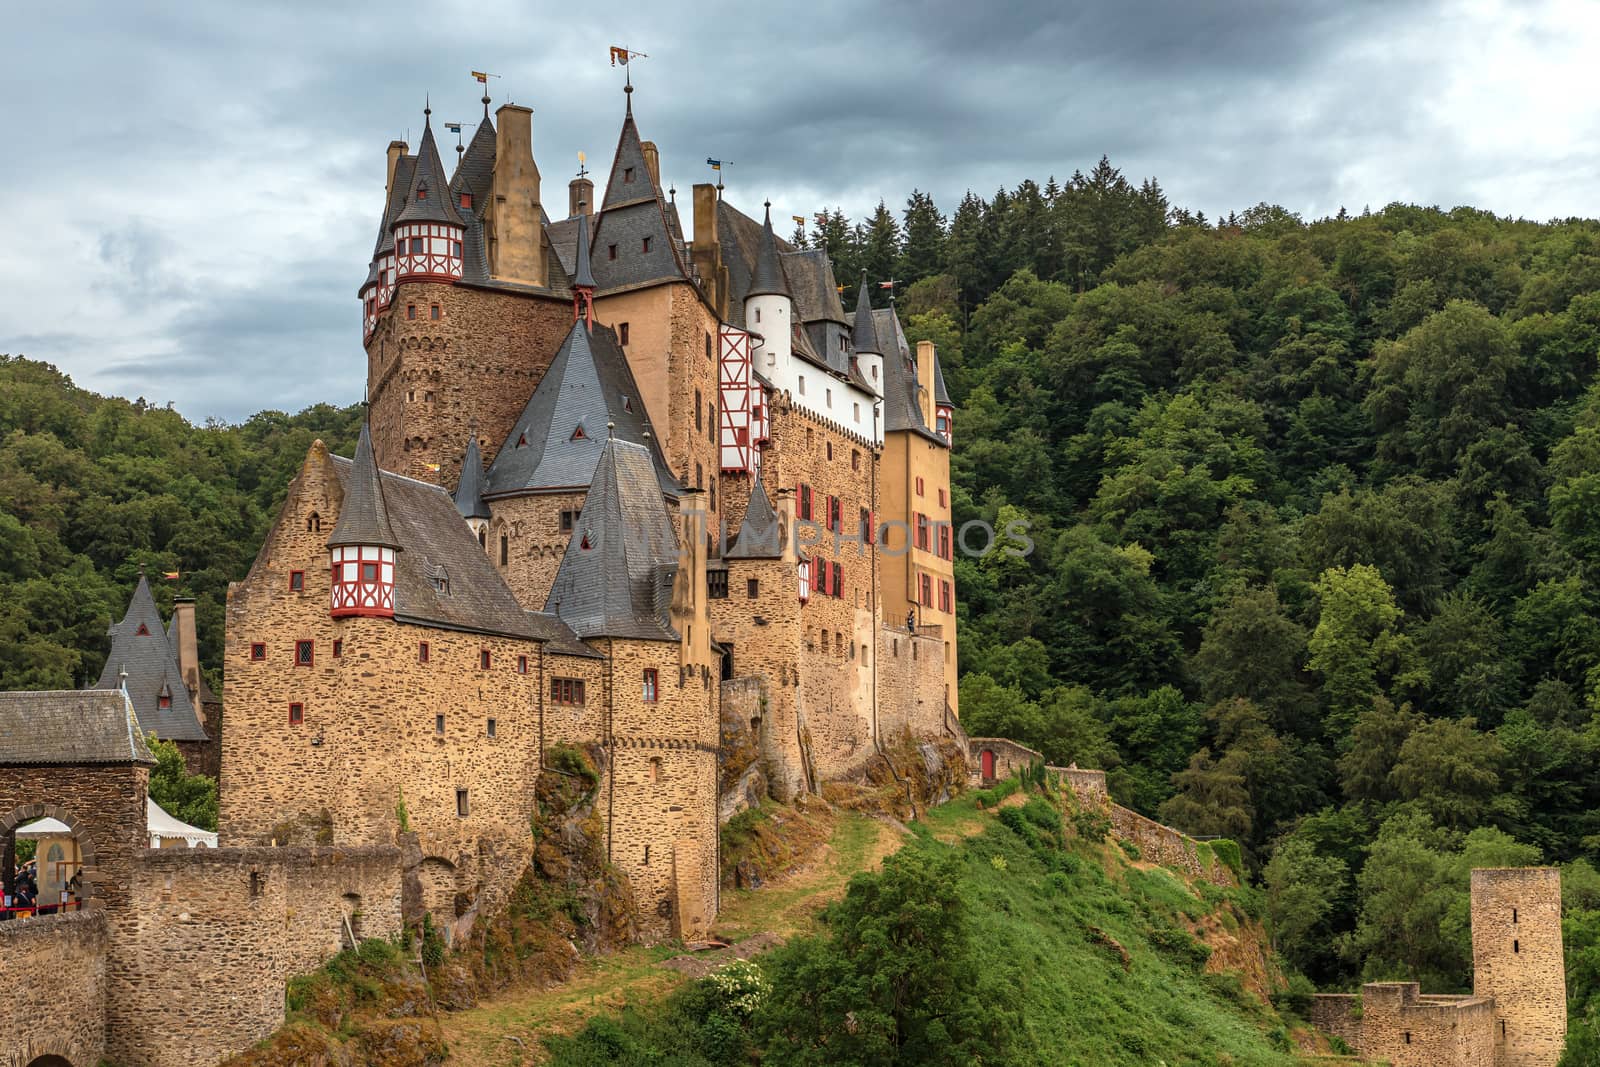 fairytale castle Eltz on the Moselle, Germany, with dramatic sky



